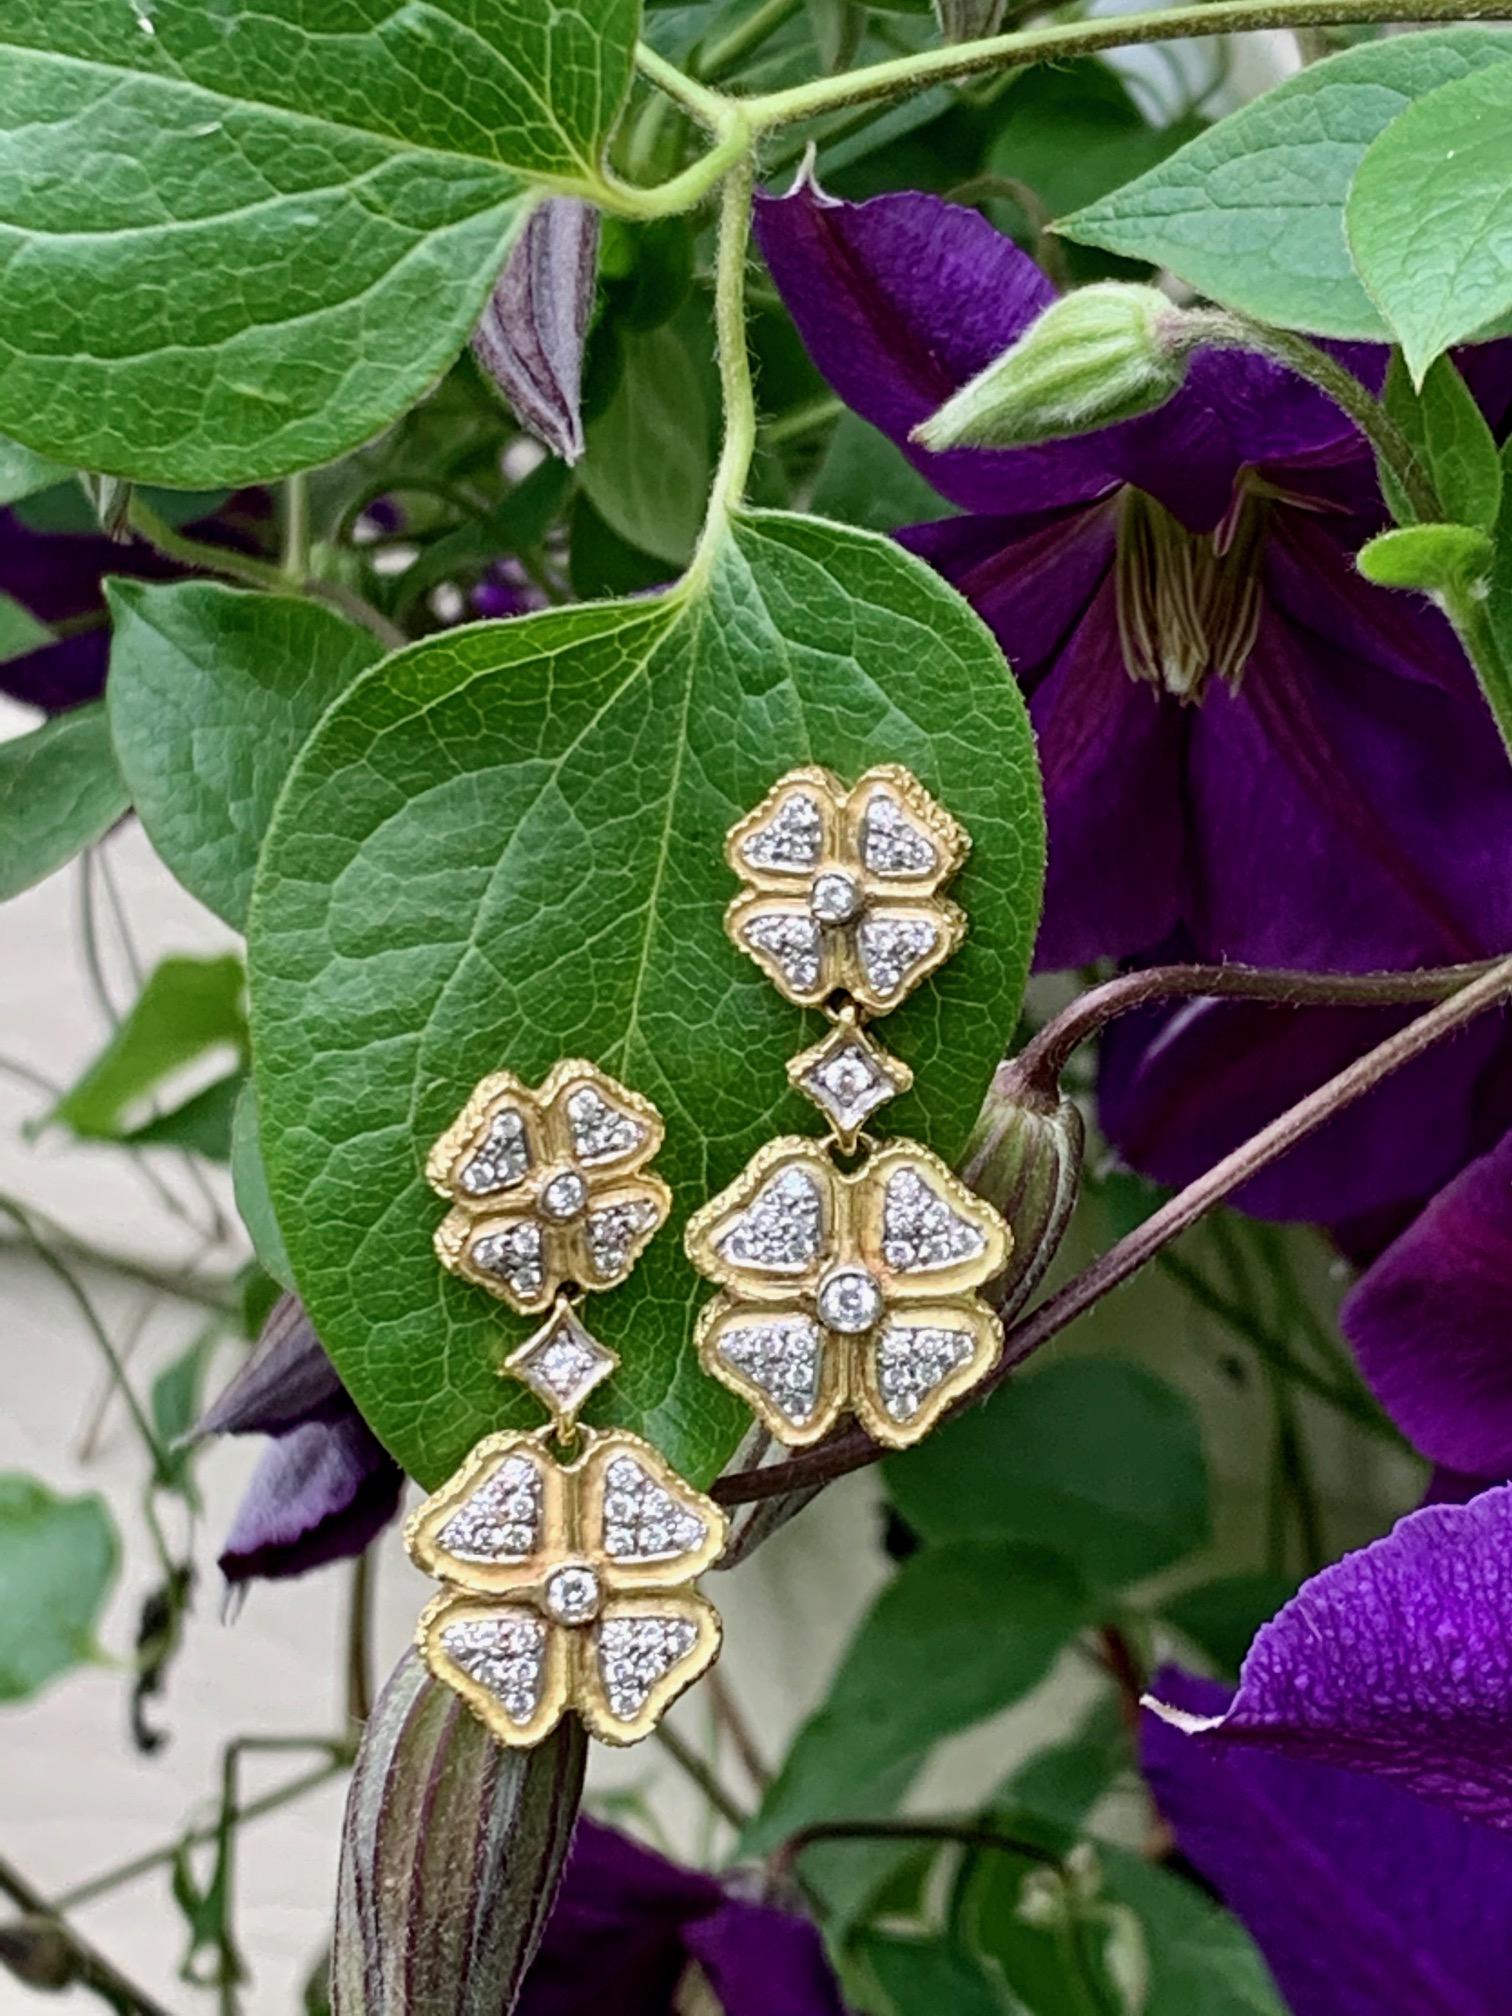 These modern, lucky, 4-leaf clover shaped pierced earrings are adorned with 1cwt of diamonds and set in 18K gold.  They were made in Torrini Italy.

There are 78 round cut Diamonds (39 per earring).

They are stamped 750 = Torrini Italy and include